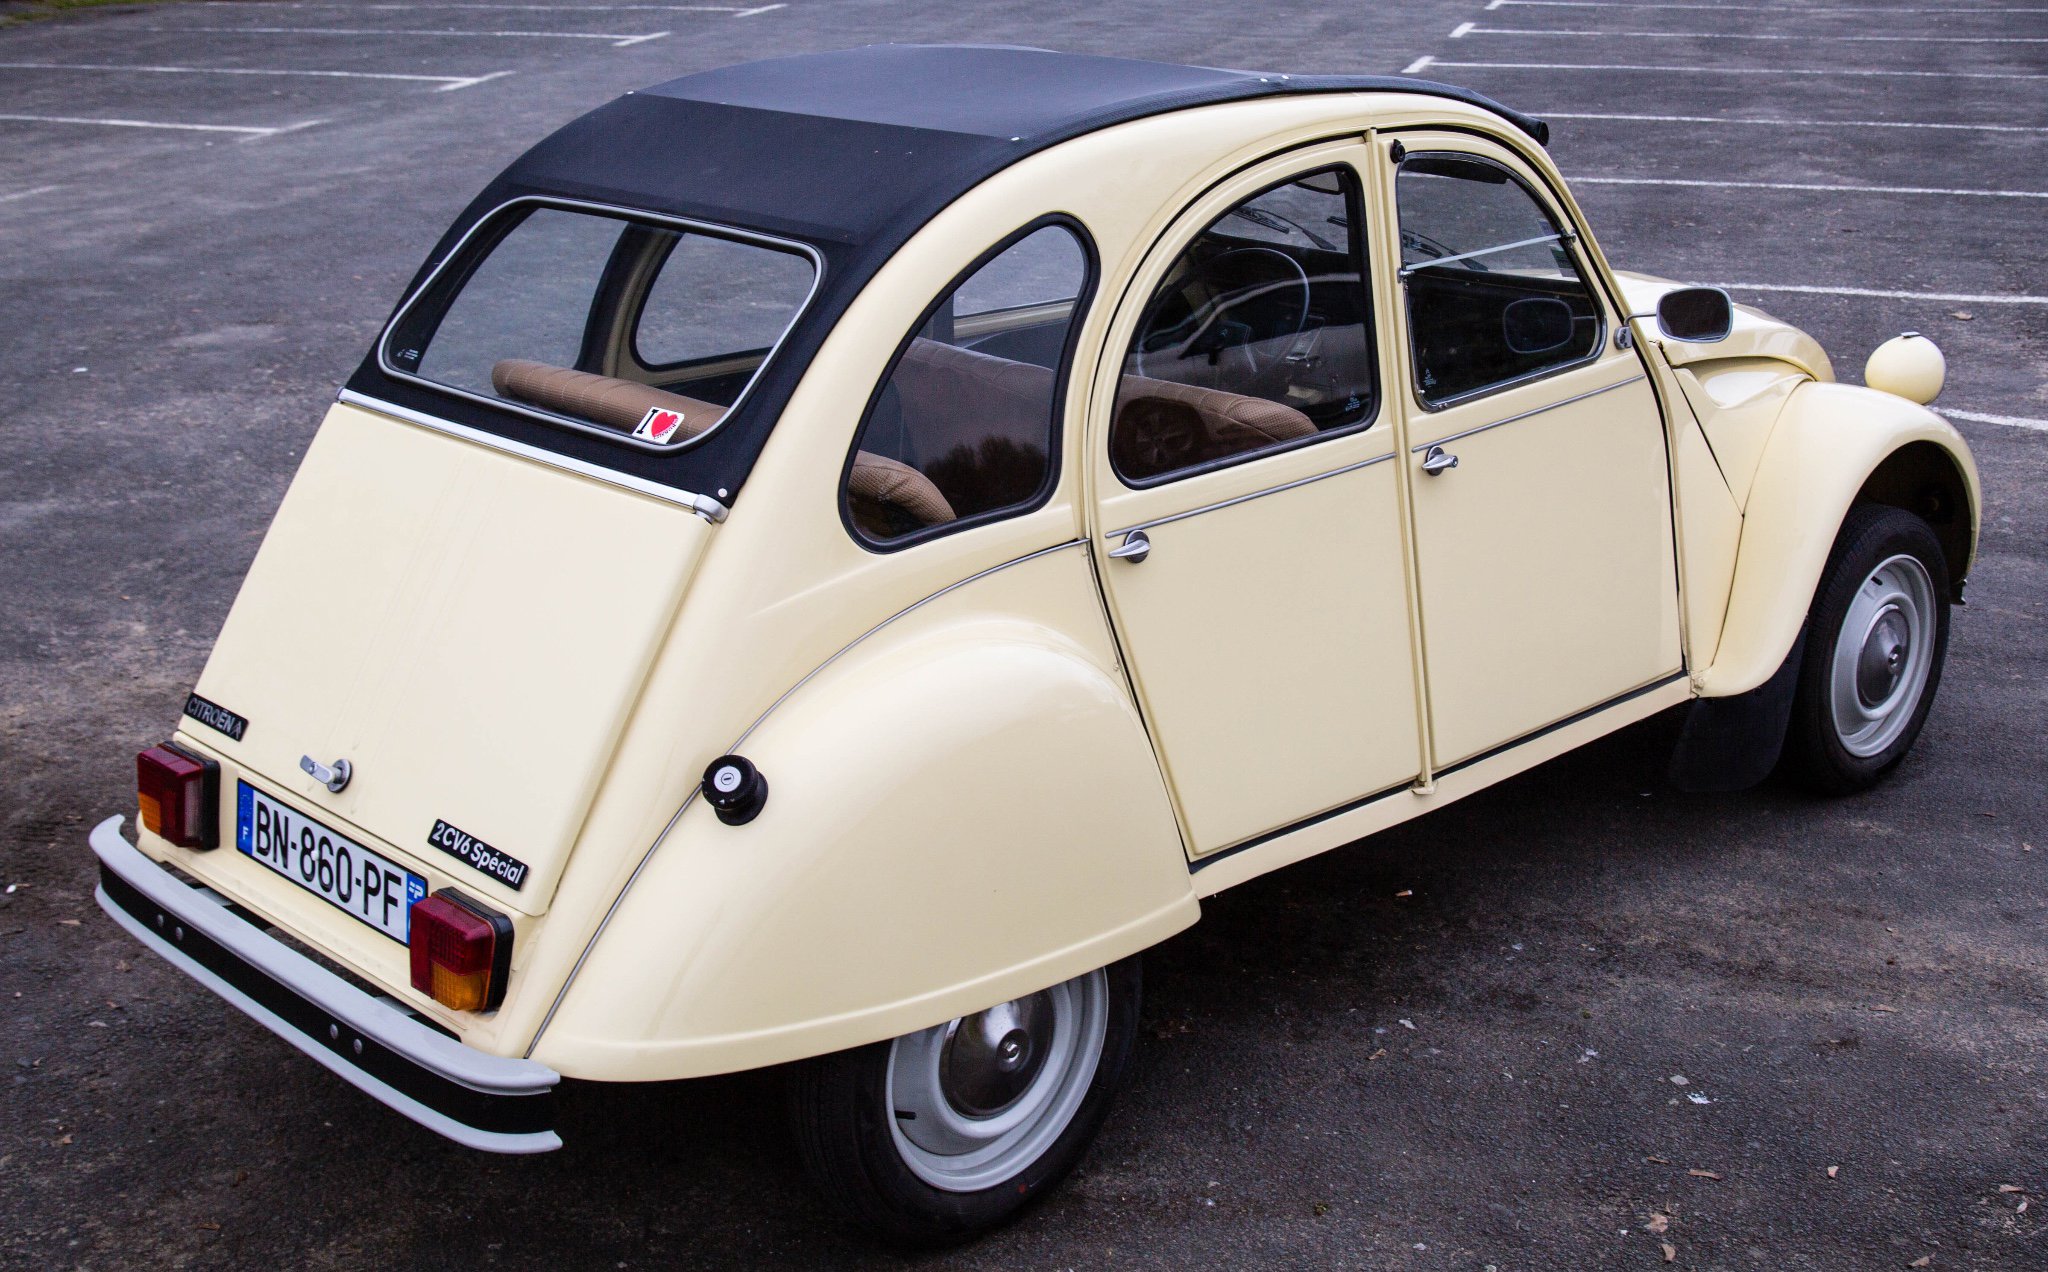 A Brief History of the Citroën 2CV - Everything You Need To Know